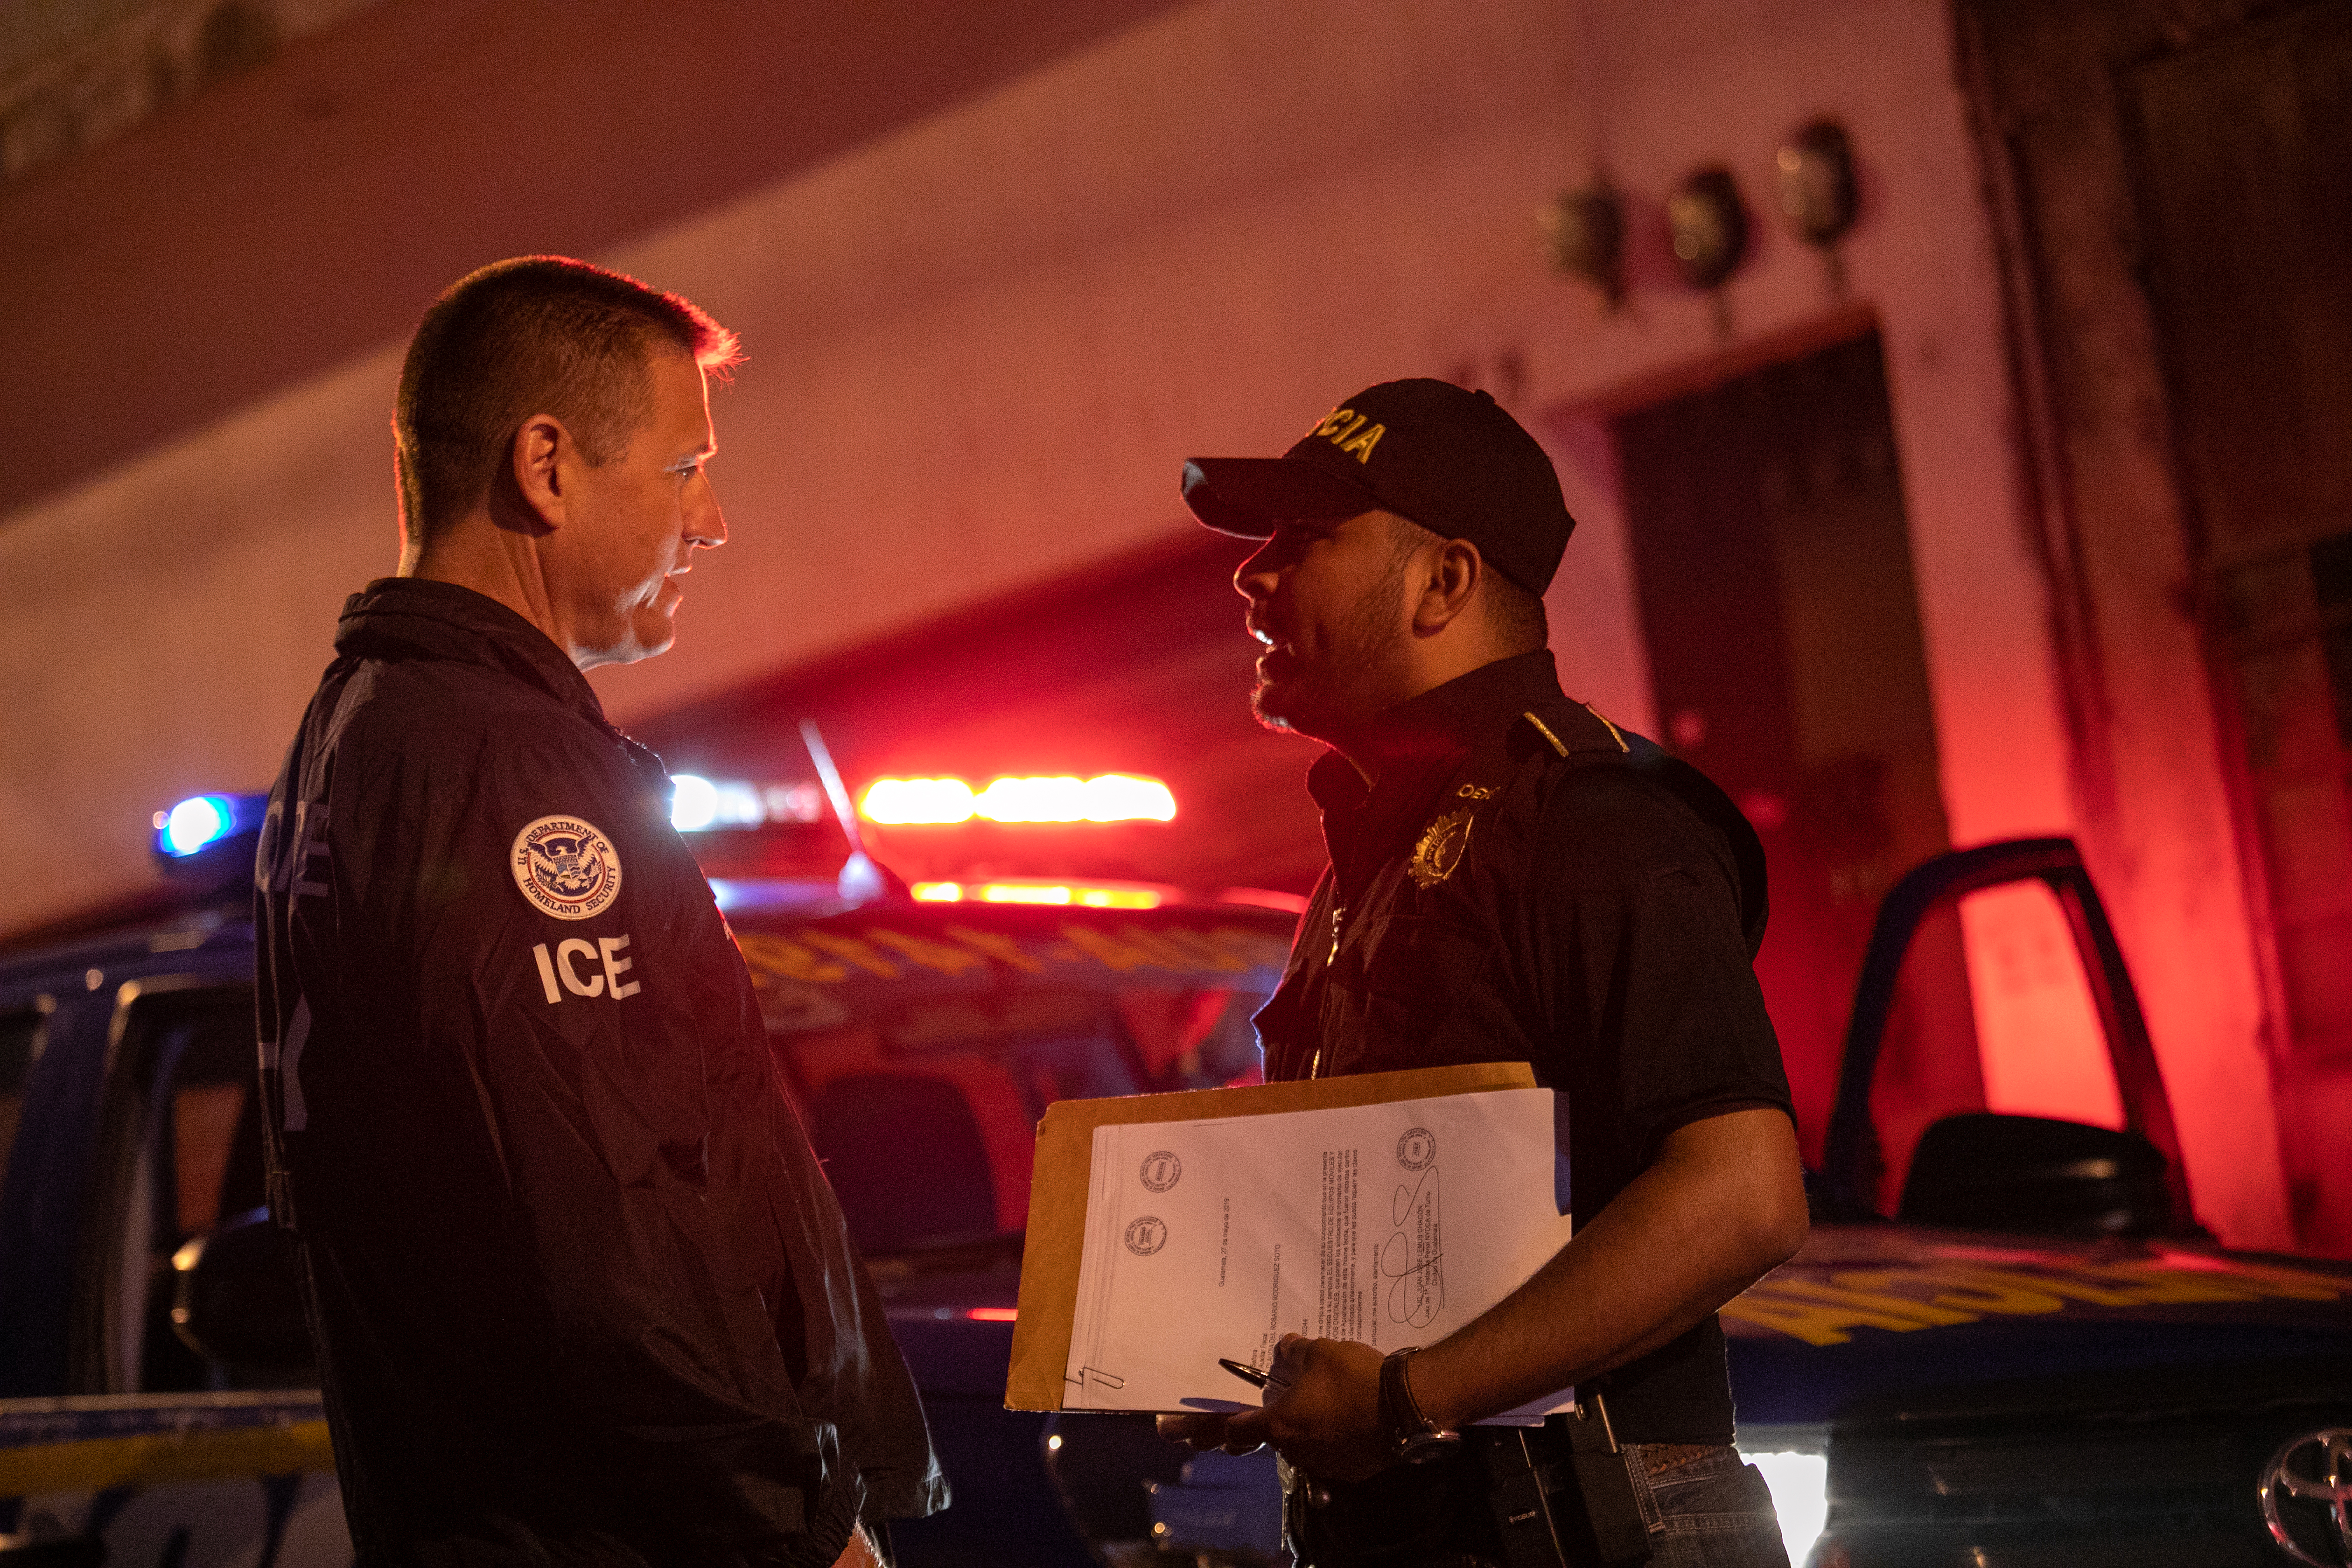 GUATEMALA CITY, GUATEMALA - MAY 29: An ICE agent with U.S. Homeland Security Investigations (HSI), (L) and a Guatemalan policeman speak at the scene of a raid where a suspected human trafficker was taken into custody on May 29, 2019 in Guatemala City. Homeland Security agents accompanied Guatemalan police on an early morning raid, the first since Acting U.S. Homeland Security Secretary Kevin McAleenan signed an agreement with his Guatemalan counterparts, increasing cooperation on human and drug smuggling. McAleenan is on a four-day trip to Guatemala. (Photo by John Moore/Getty Images)